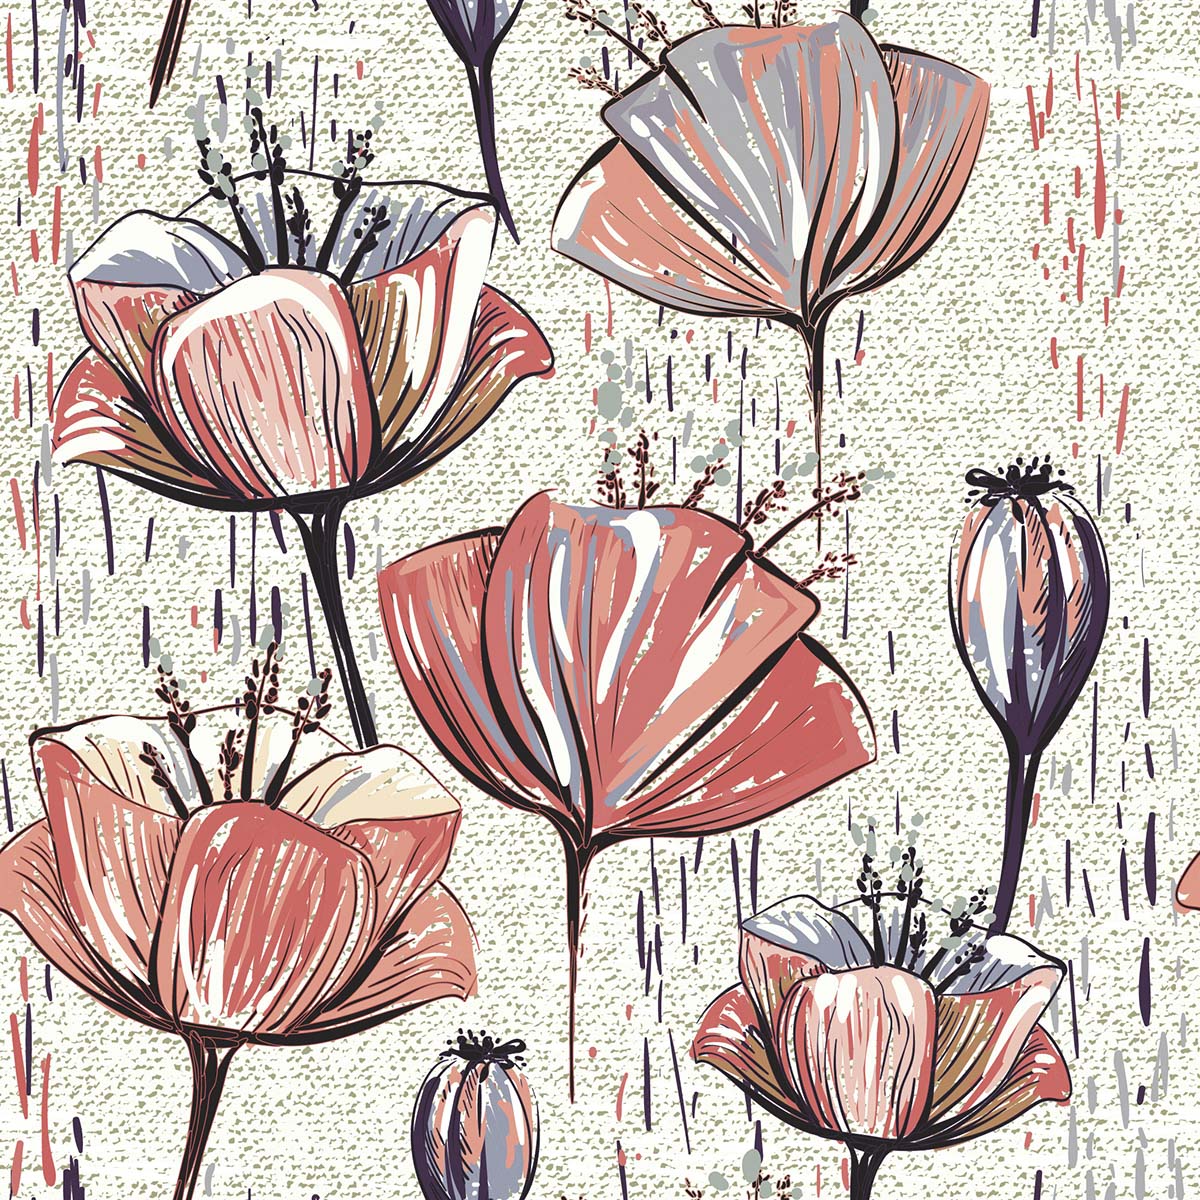 A pattern of flowers on a fabric surface